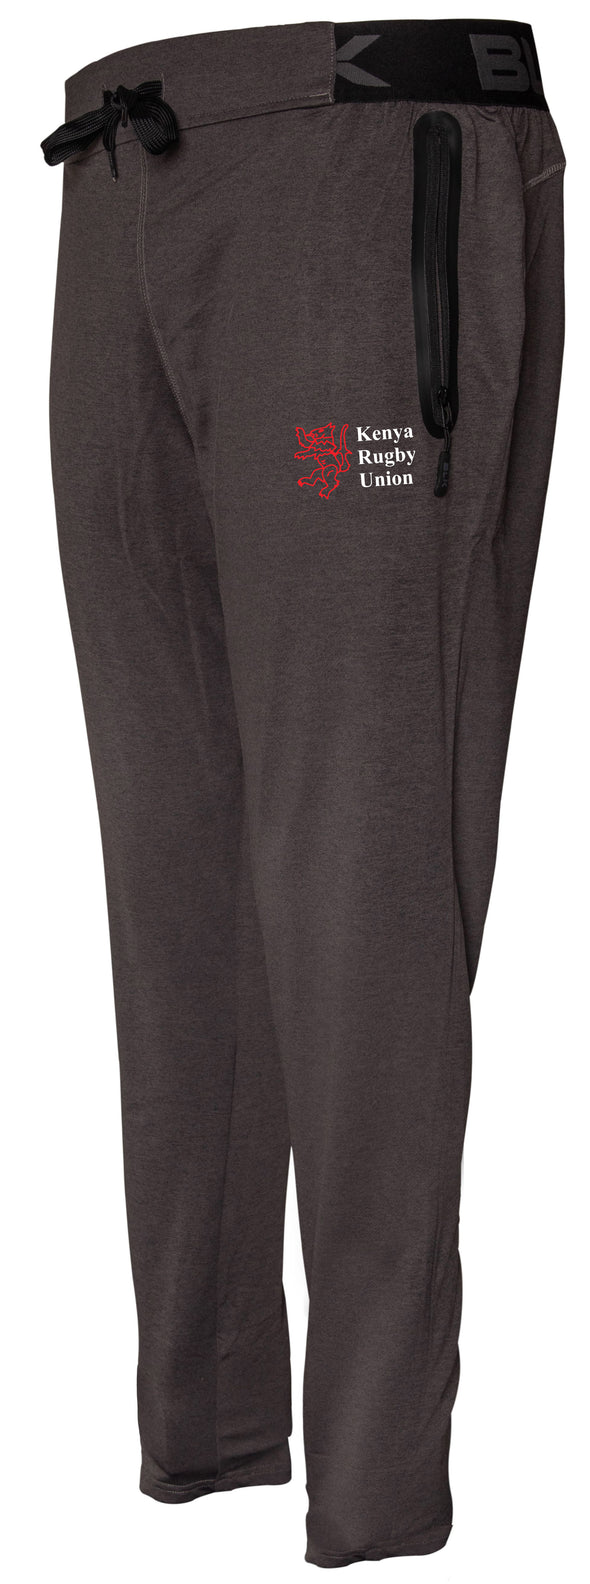 Kenya Rugby Tapered Training Pant - Charcoal